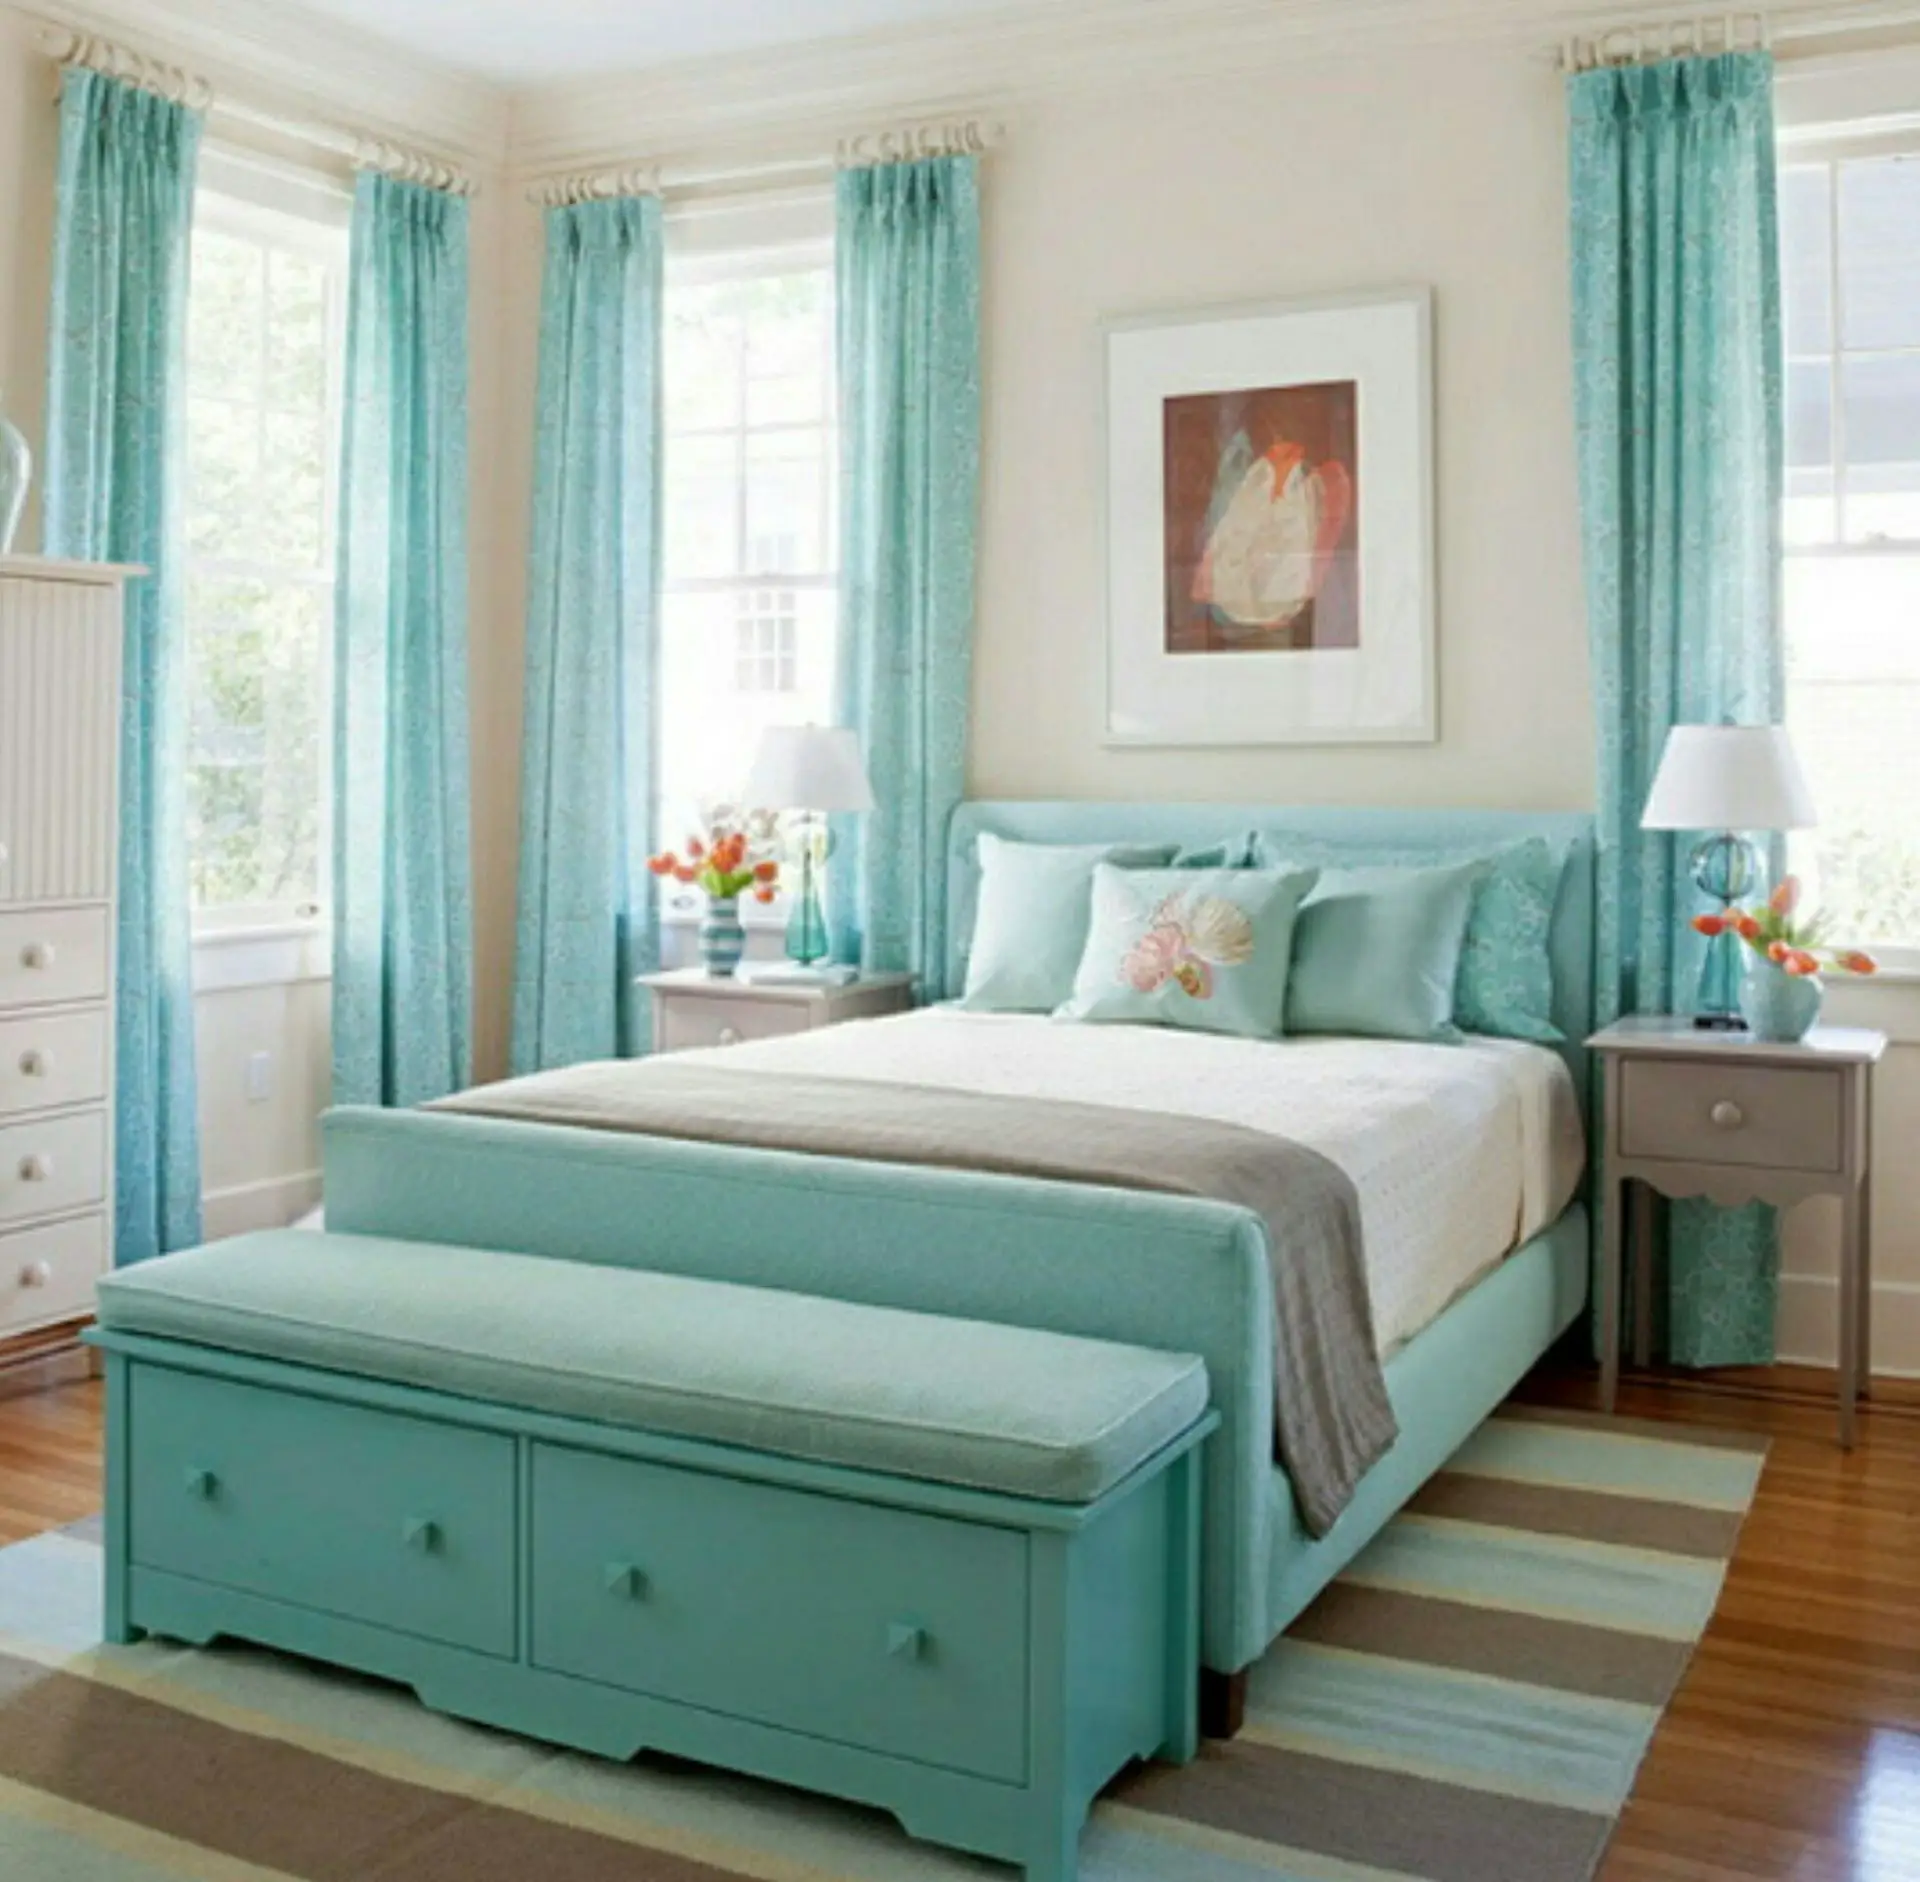 Turquoise and Gray Bedroom